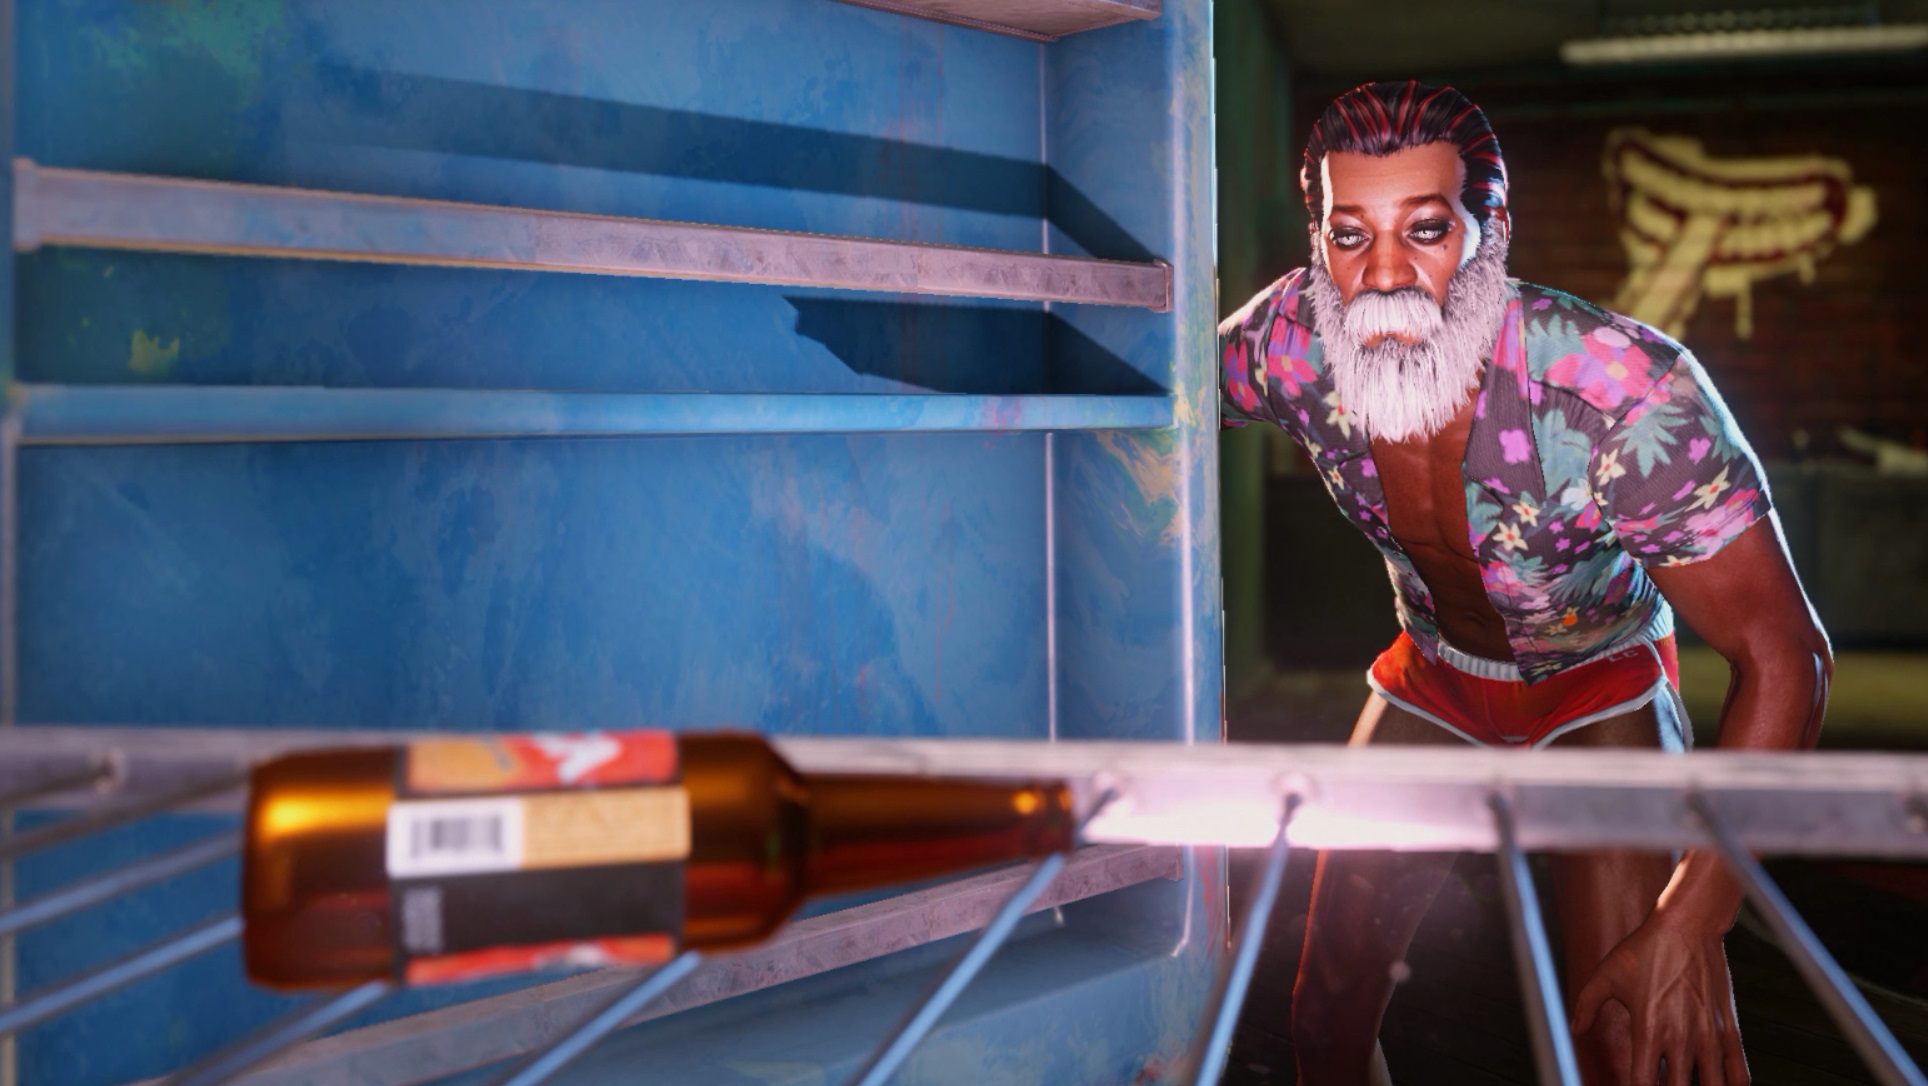 Sunset Overdrive screens show action on foot and in the air